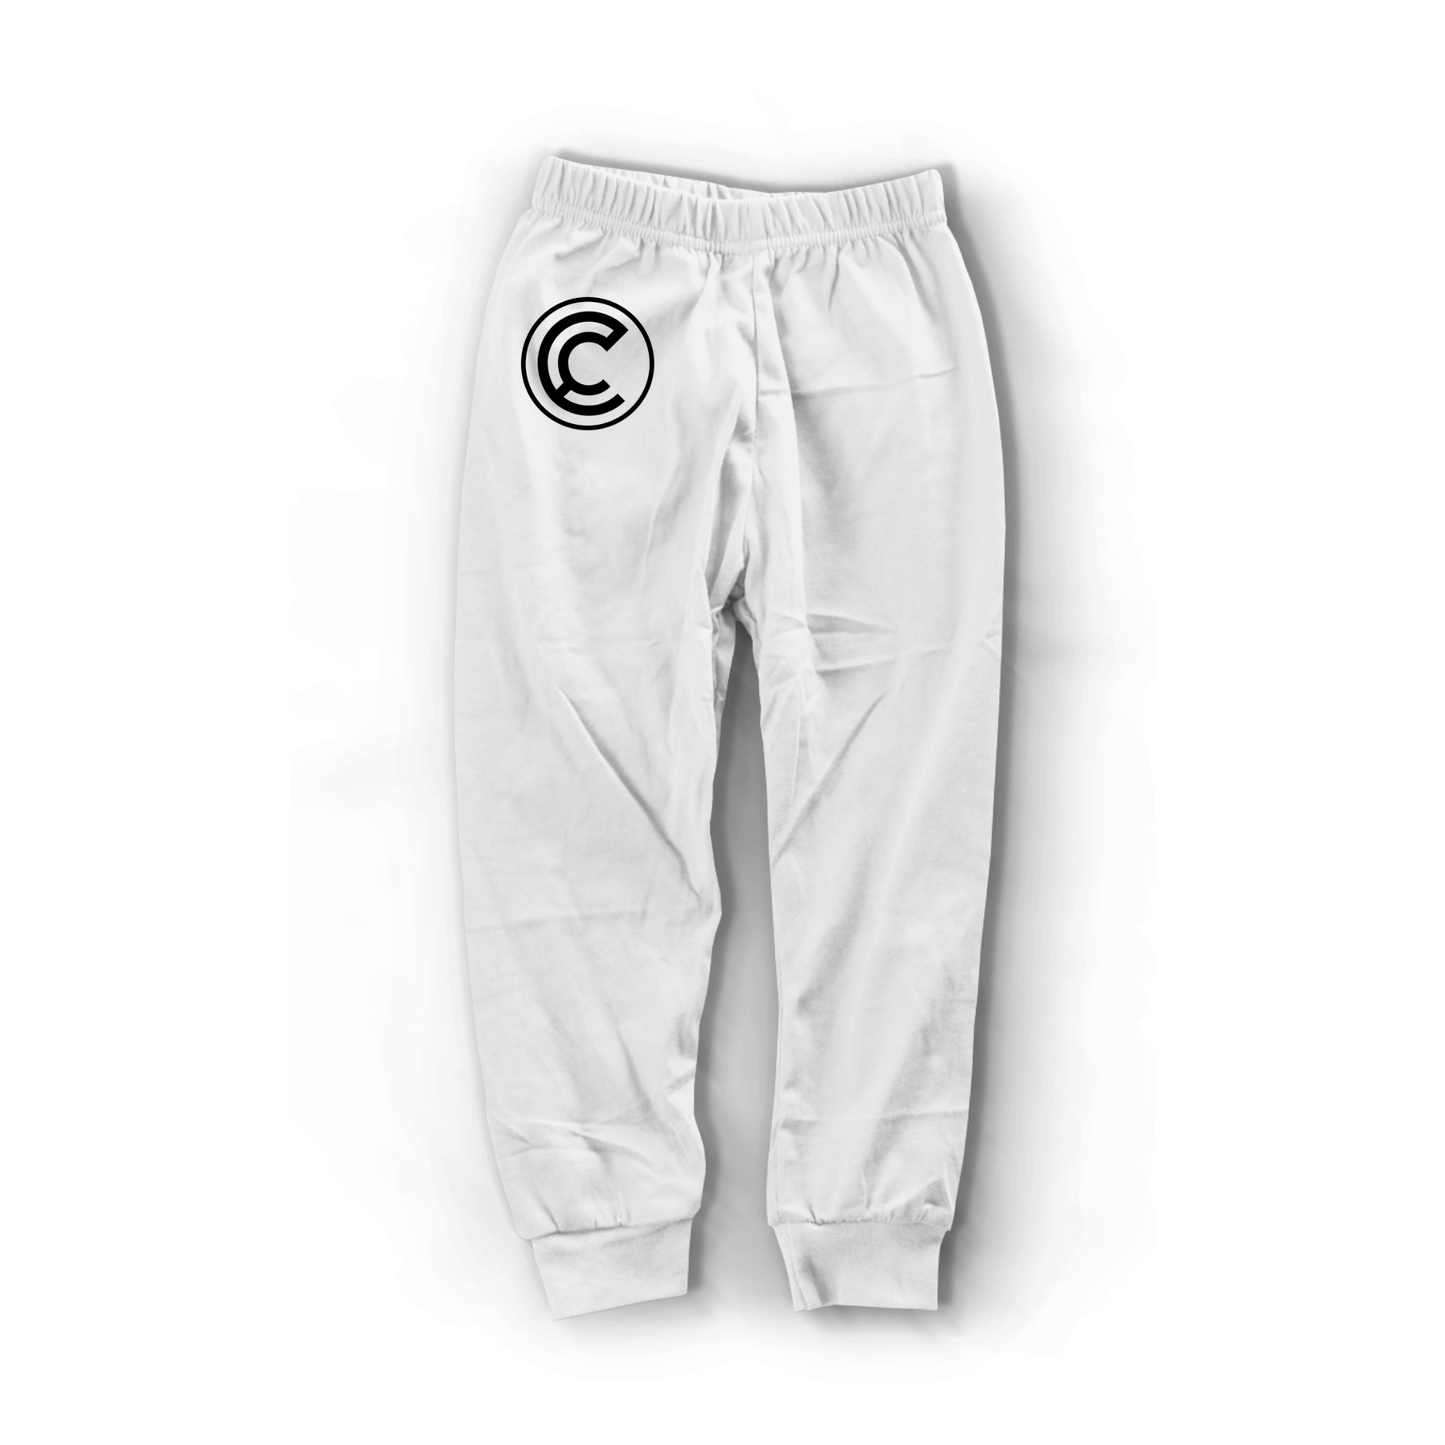 The Collab Joggers